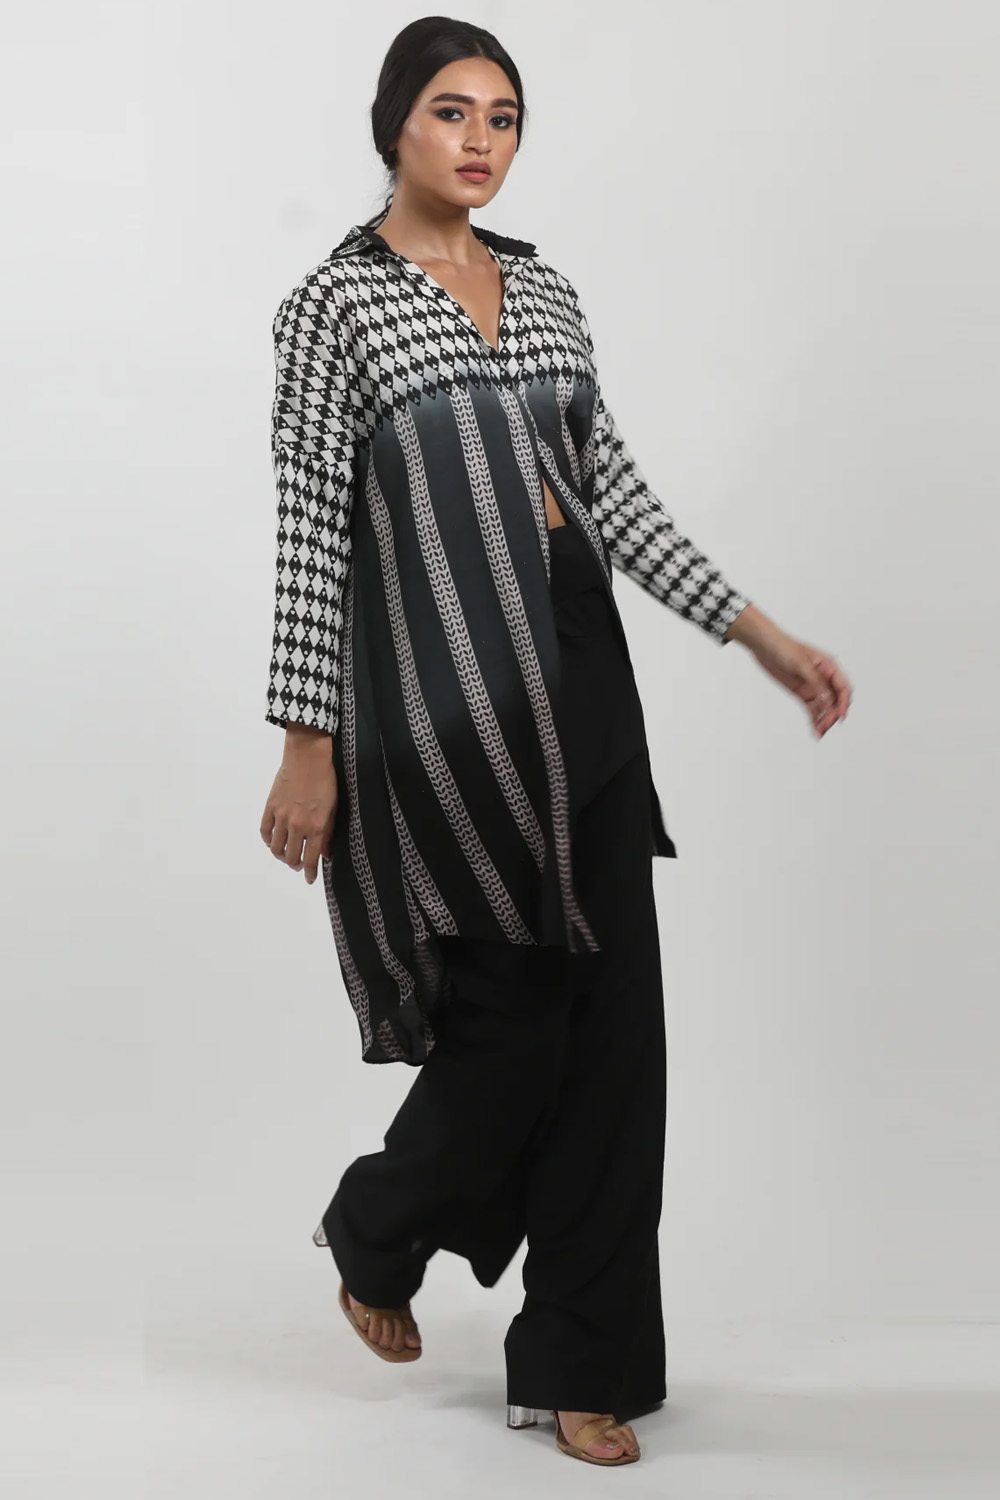 Blck/White Shaded Block Printed & embroidered Shirt Tunic